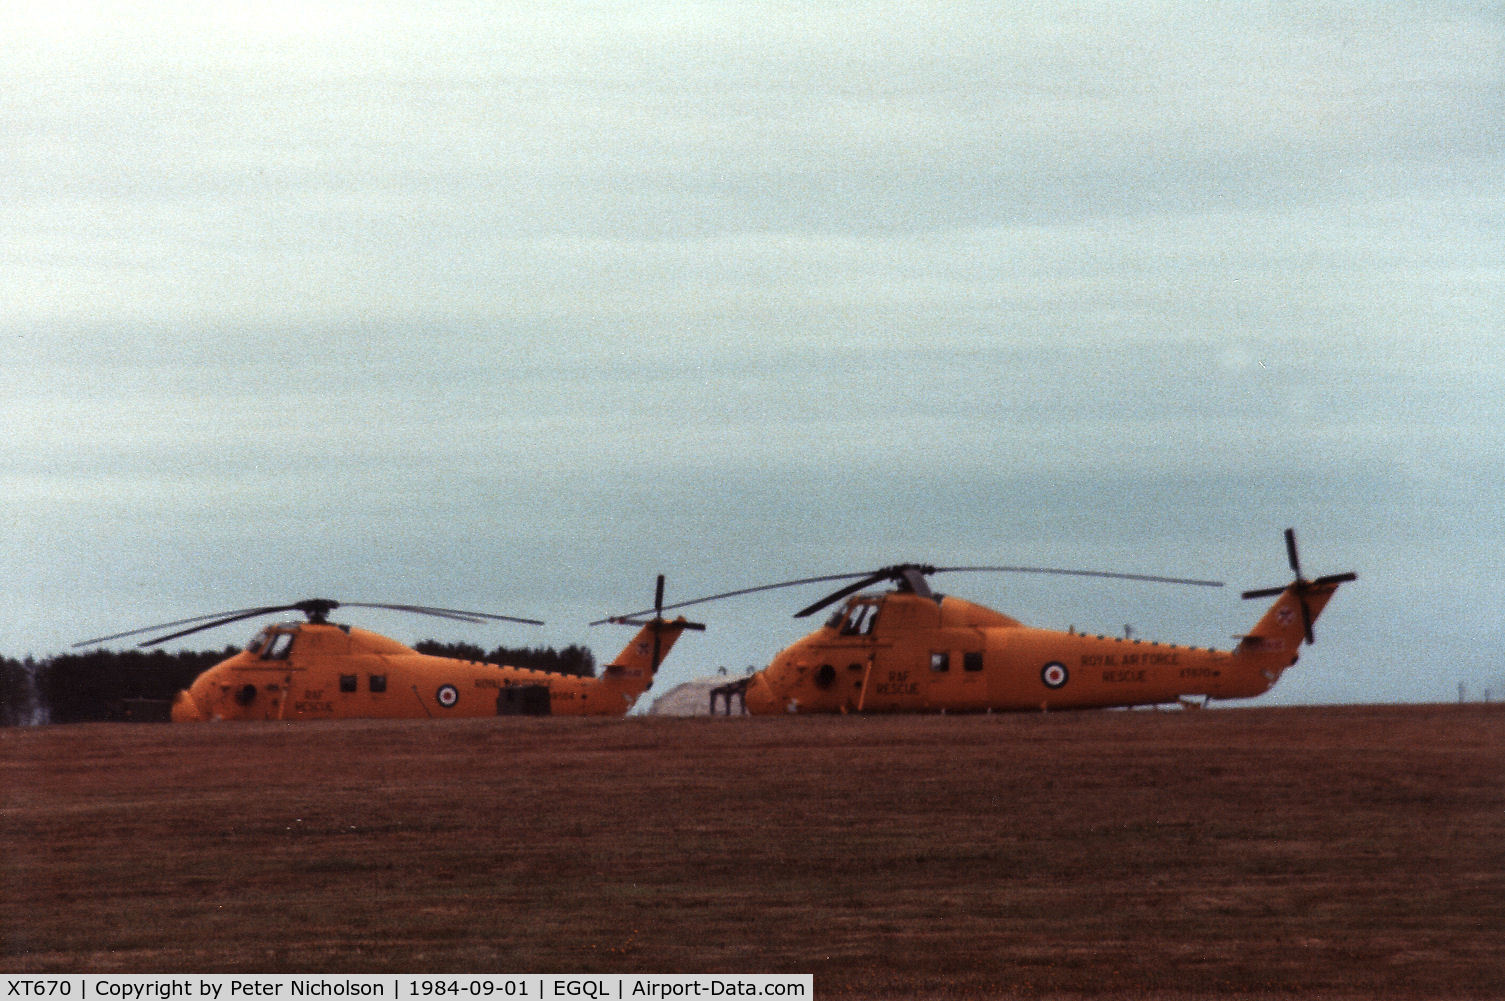 XT670, 1966 Westland Wessex HC.2 C/N WA538, Wessex HC.2 of 22 Squadron together with companion XR 504 on the left seen at the 1984 RAF Leuchars Airshow.